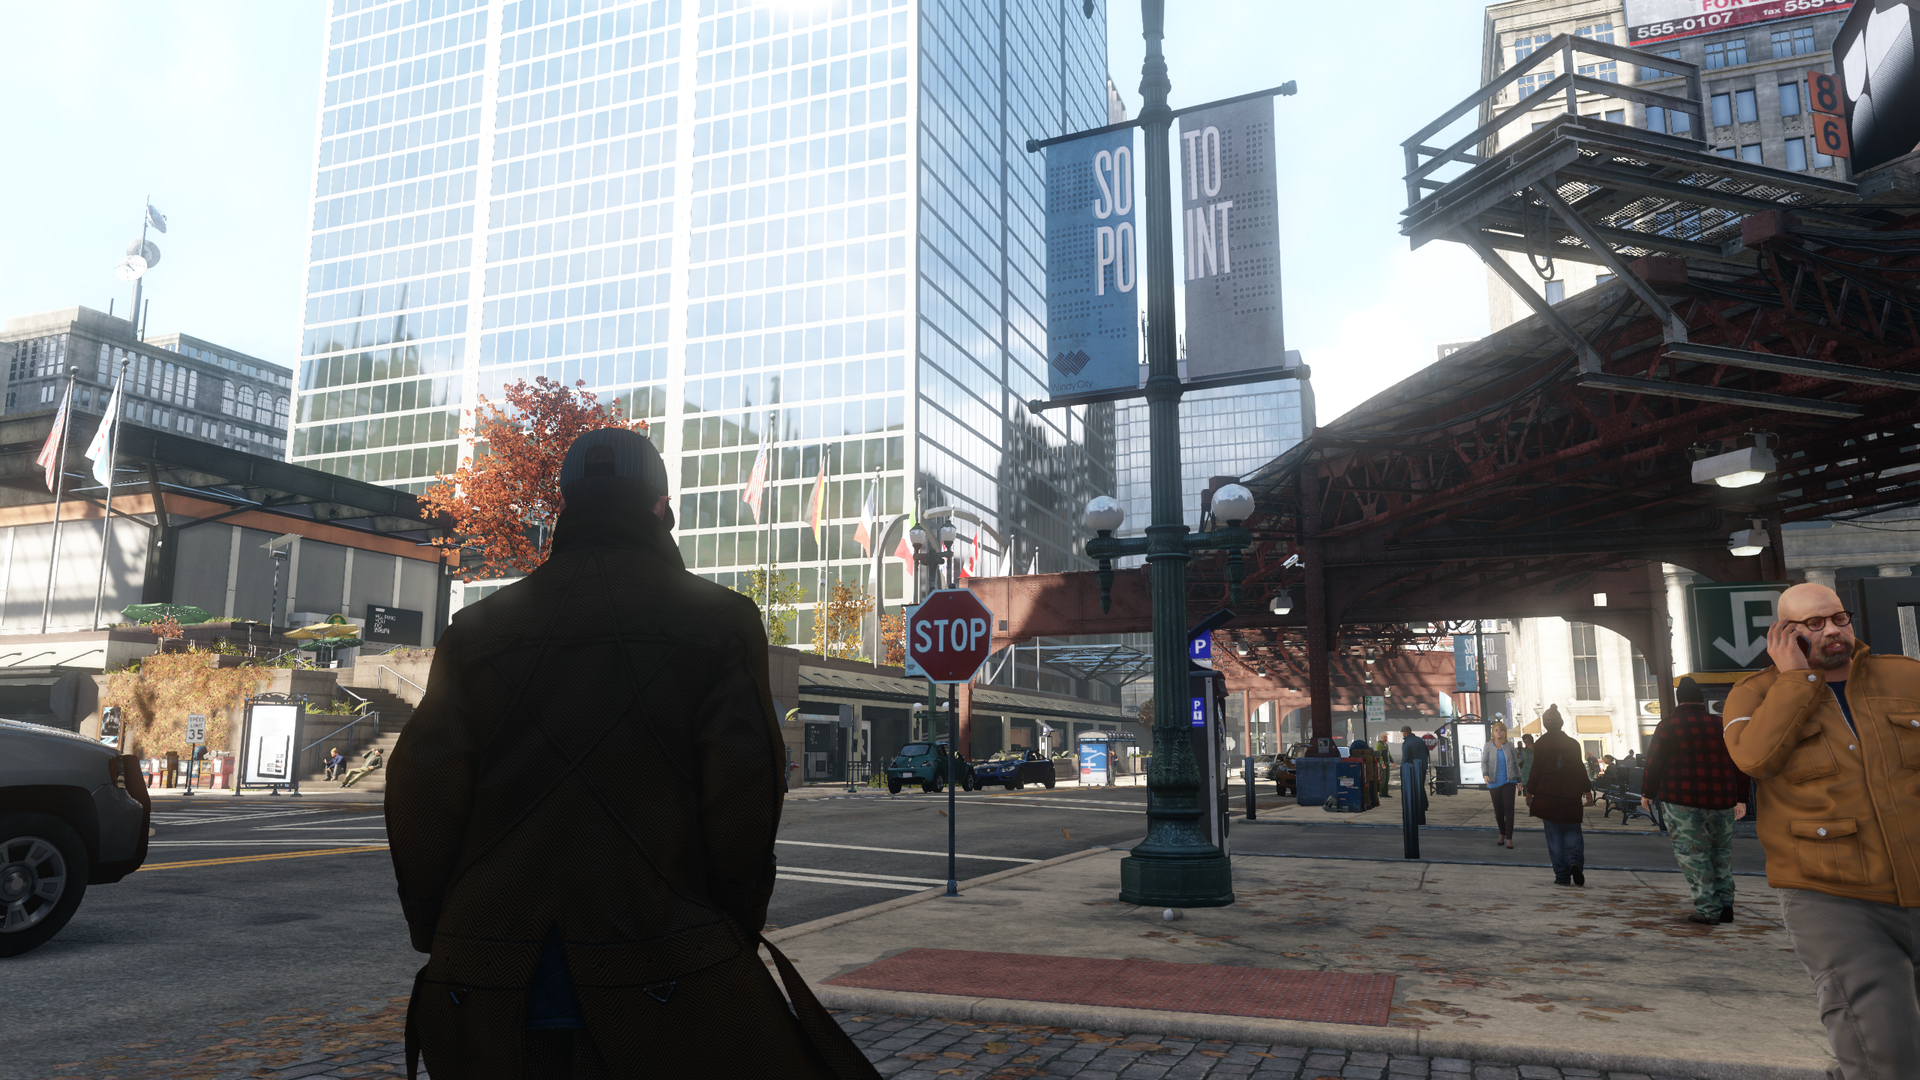 watch_dogs_exe_dx11_20140529_234654_1080p_by_confidence_man-d7kbl78.jpg